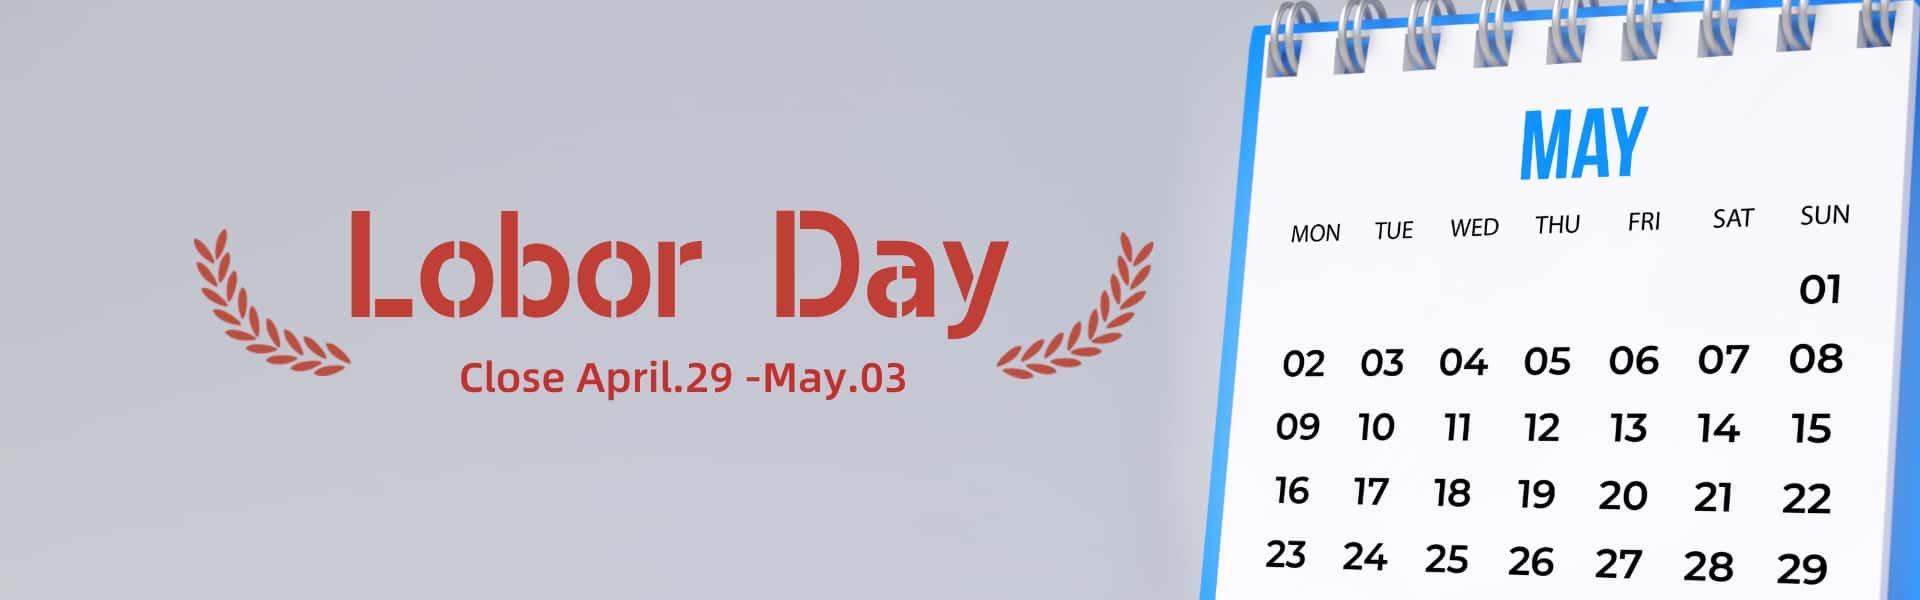 Close Notice of Lobor Day April.29 -May.03